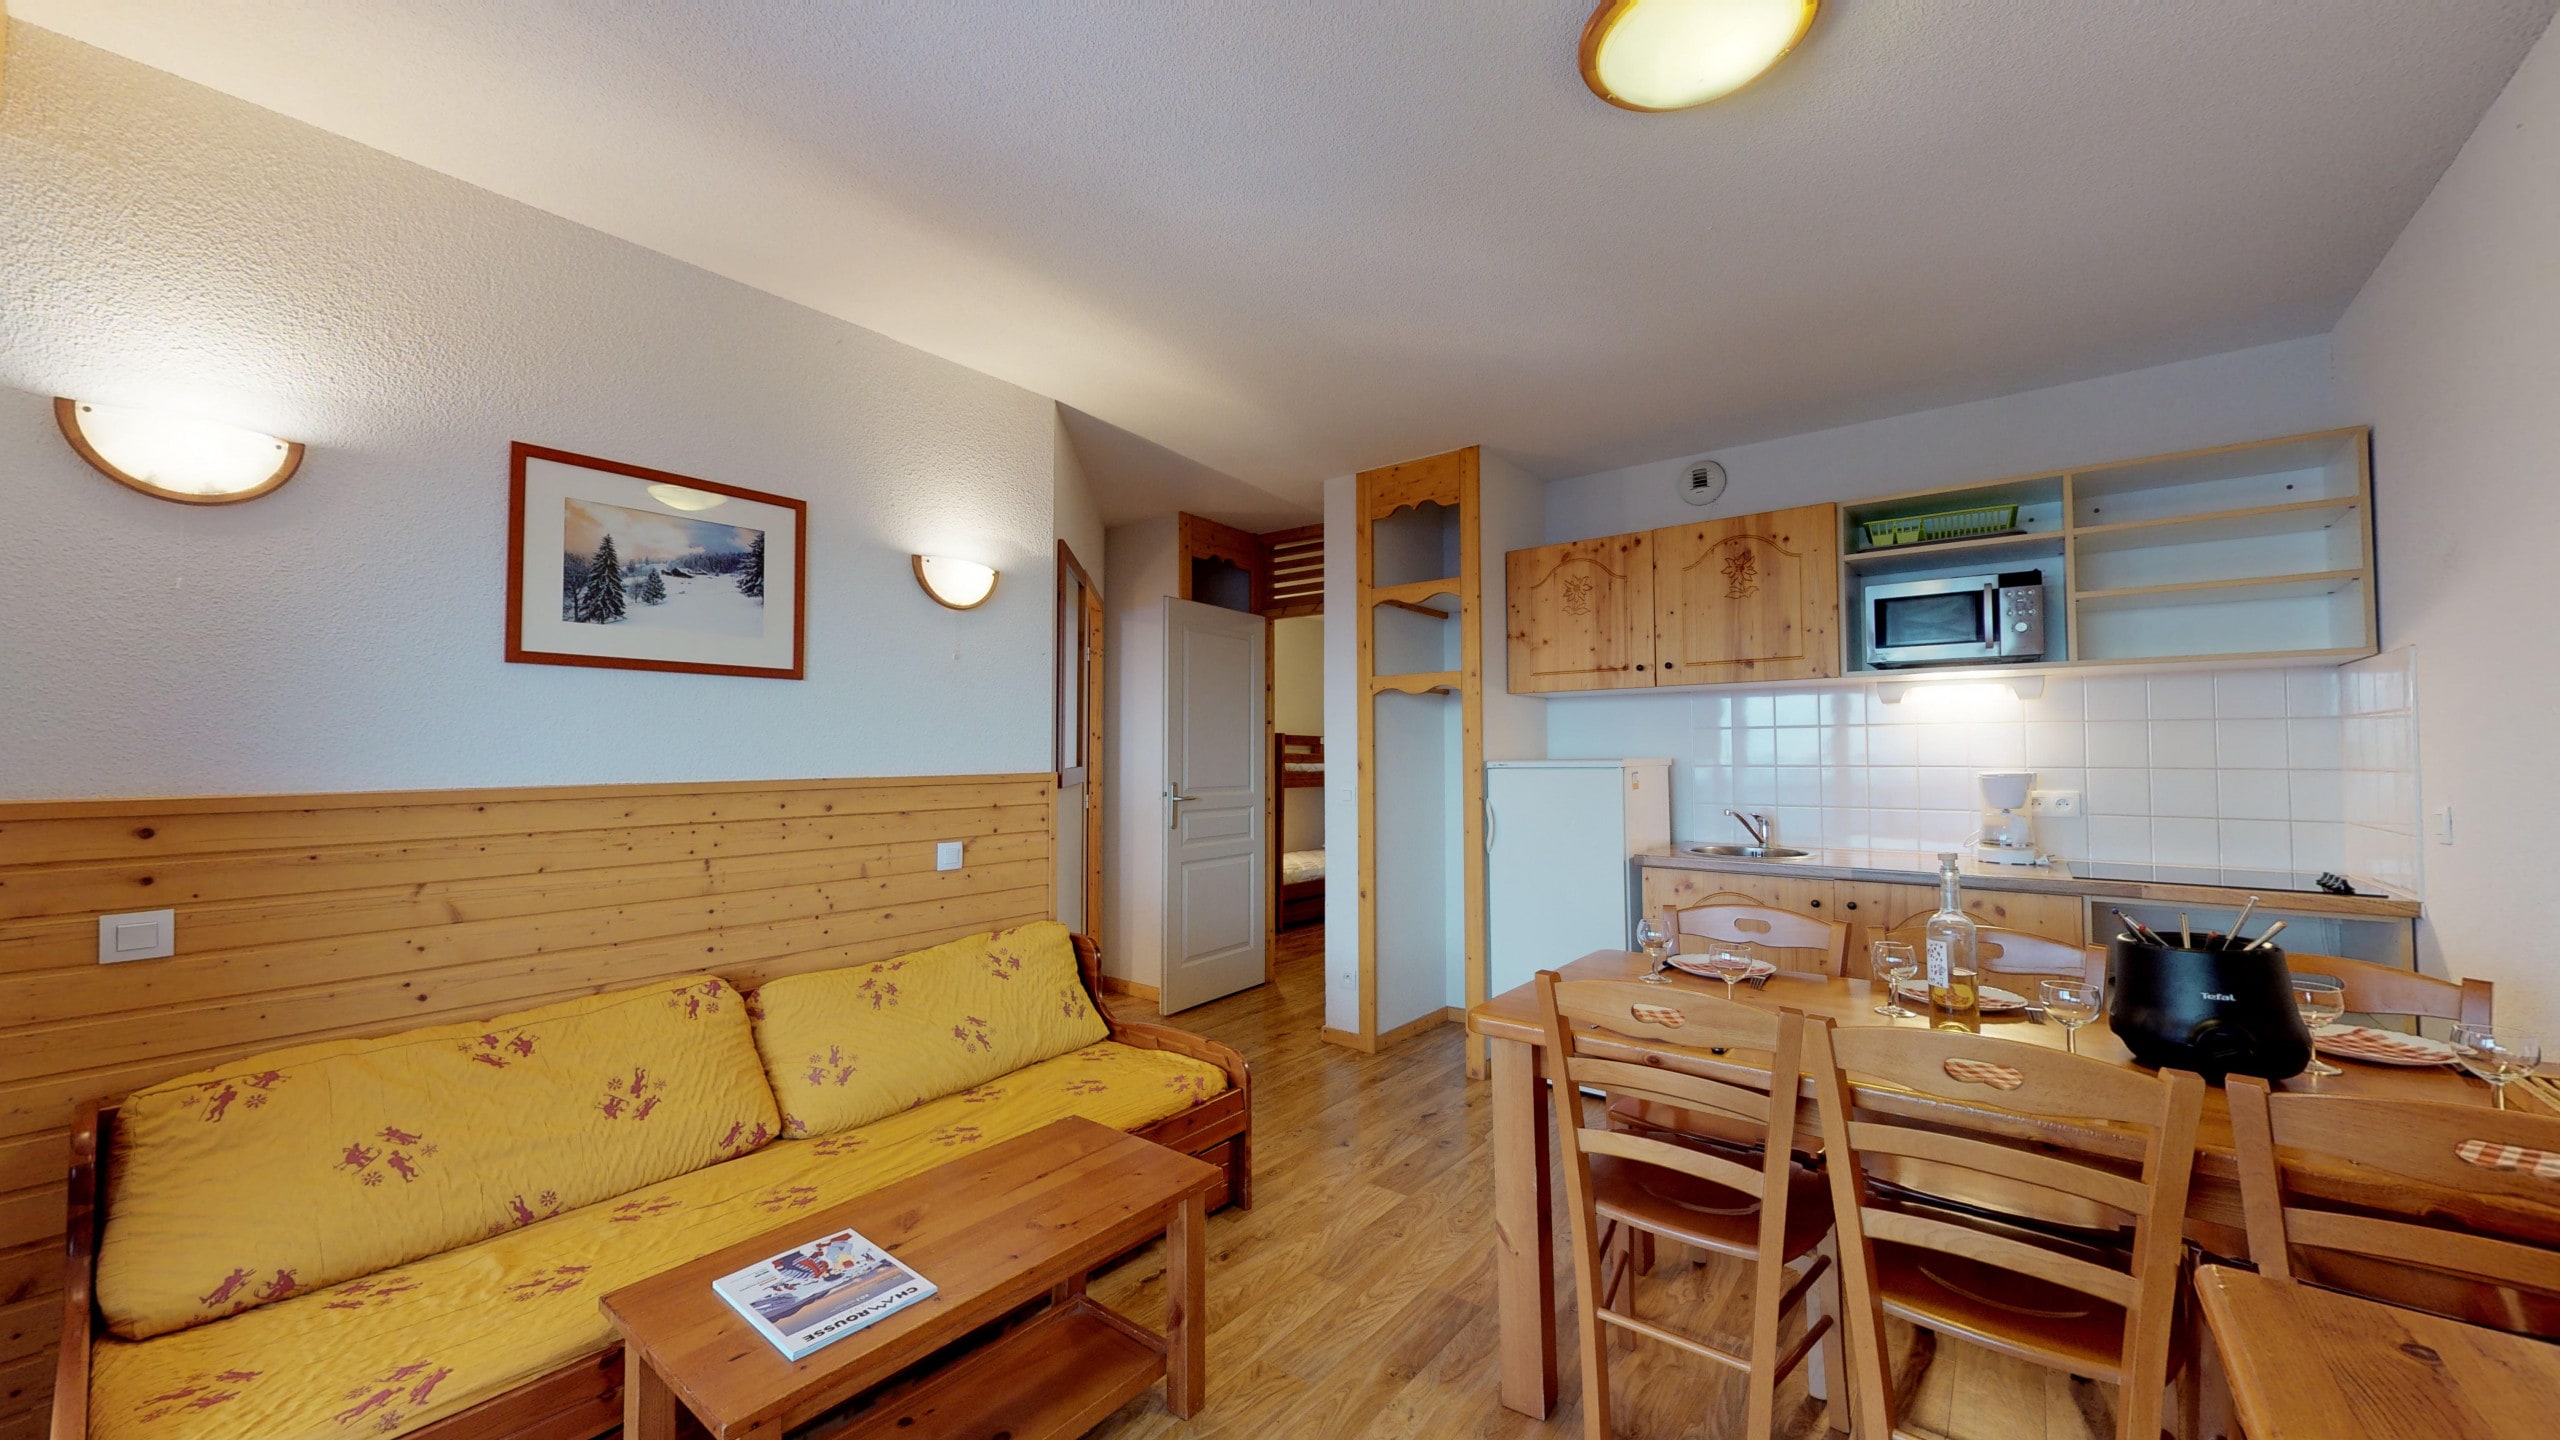 2 rooms 6 persons mountain view and view of the ski slopes - Apartements Chartreuse 1 039-FAMILLE & MONTAGNE appart. 6 pers - Chamrousse